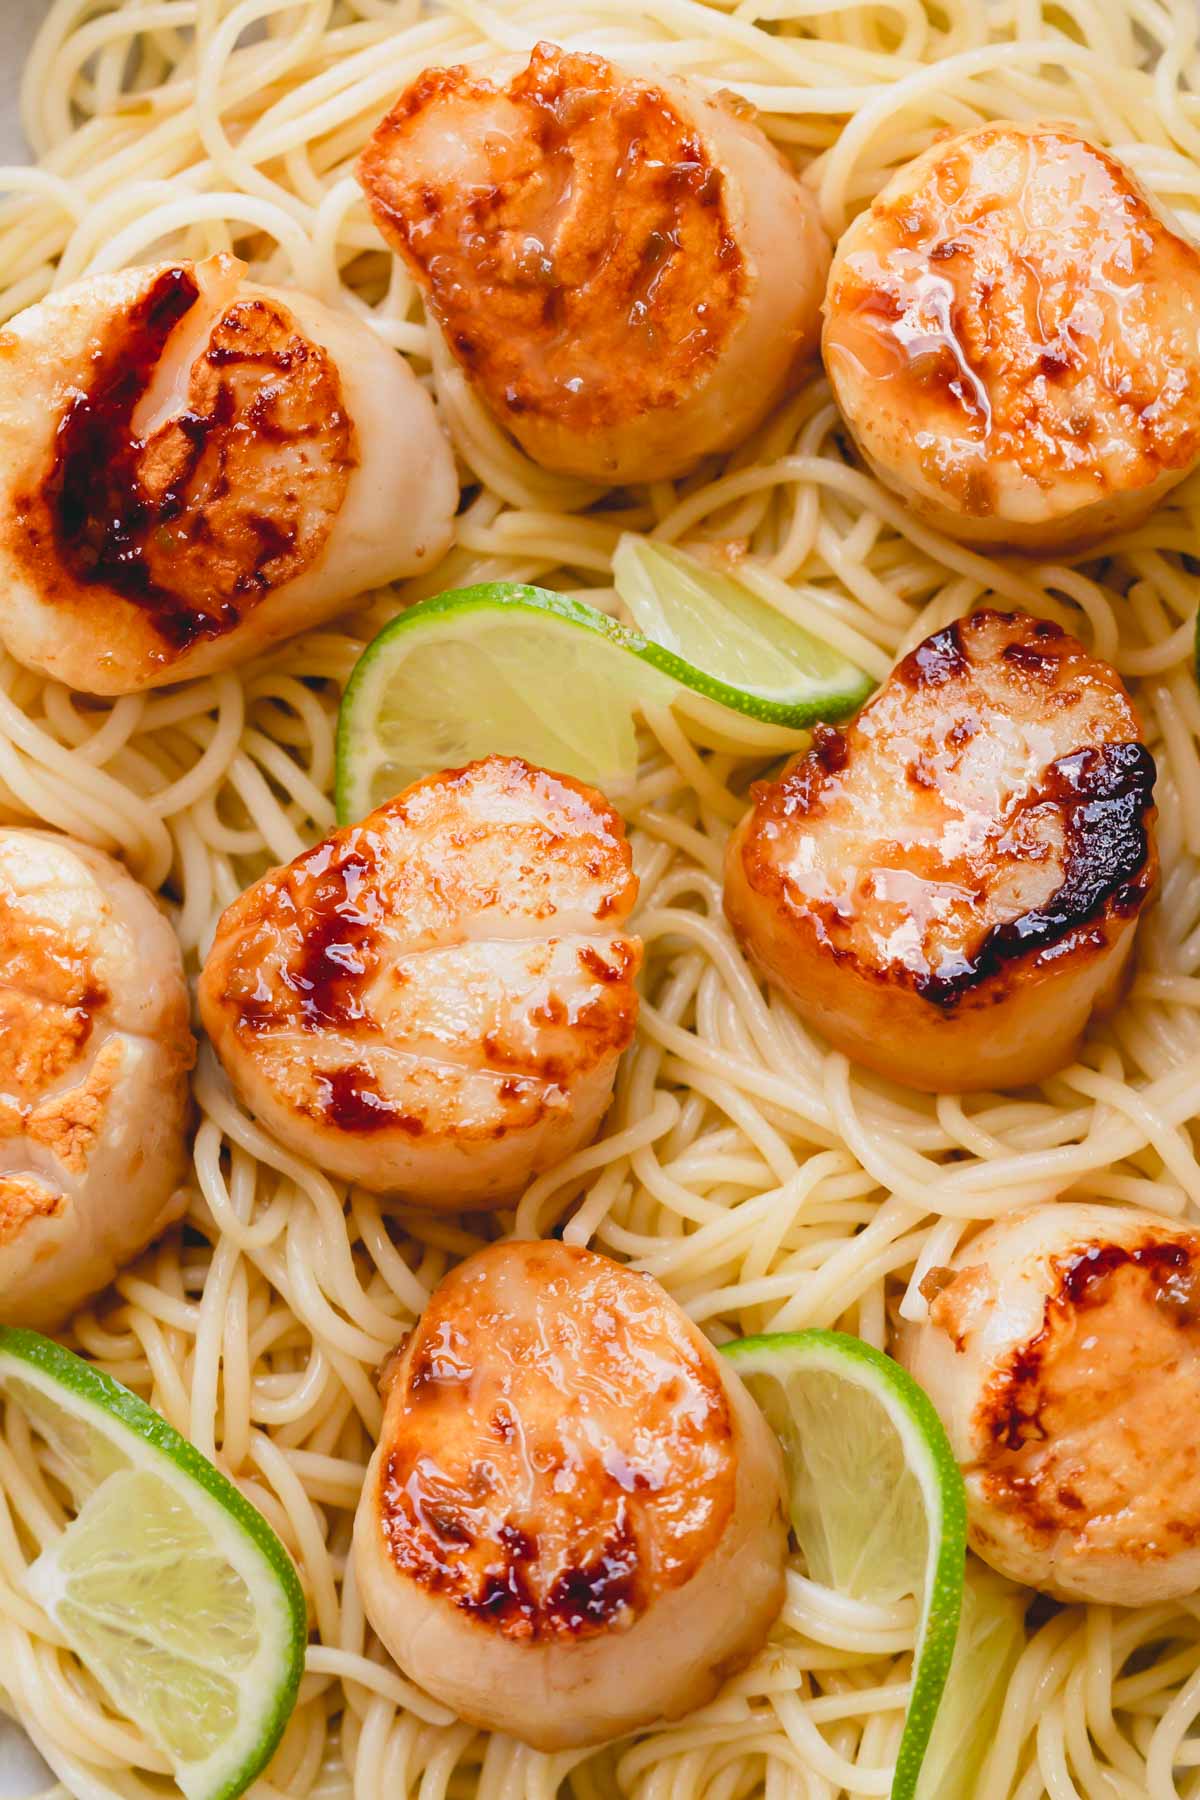 Seared scallops over noodles garnished with lime slices.